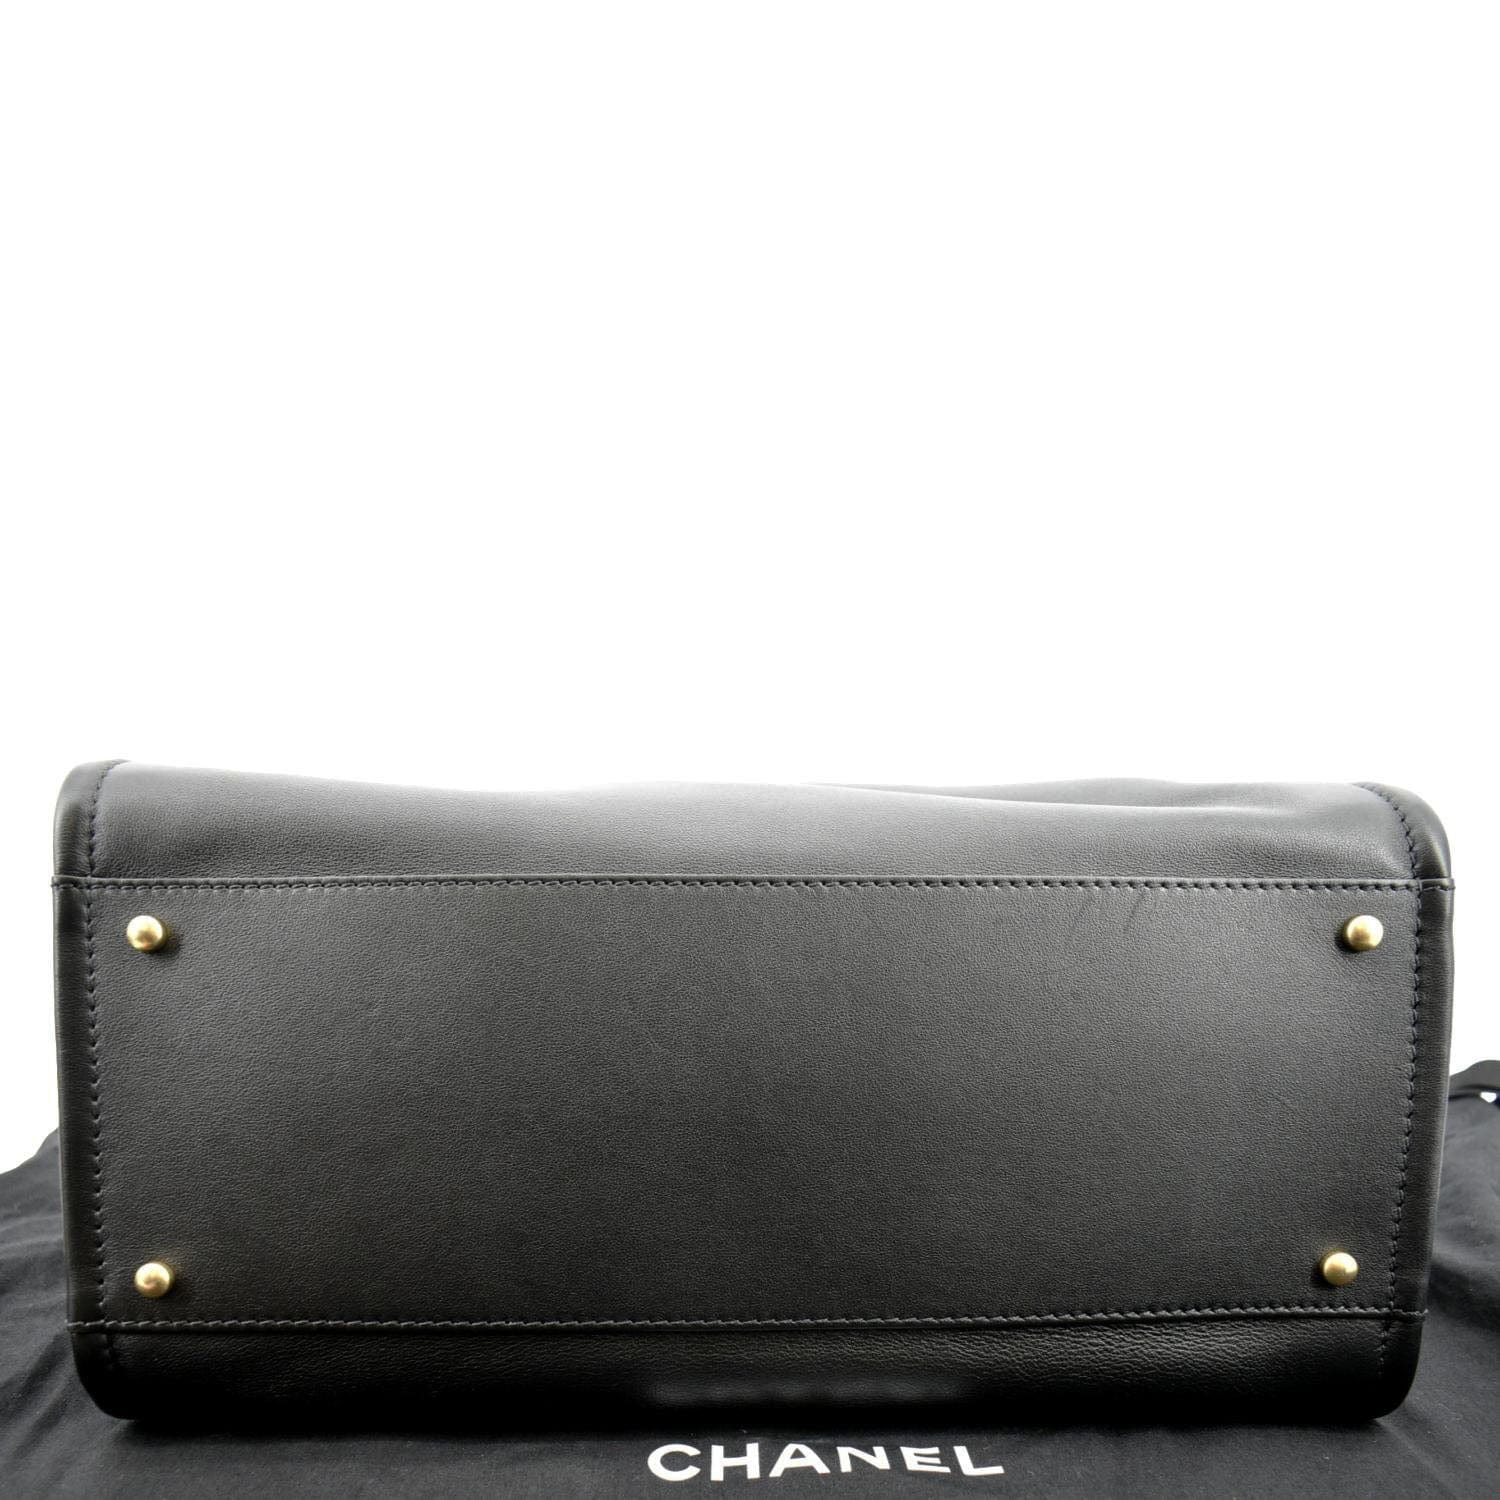 chanel deauville black leather